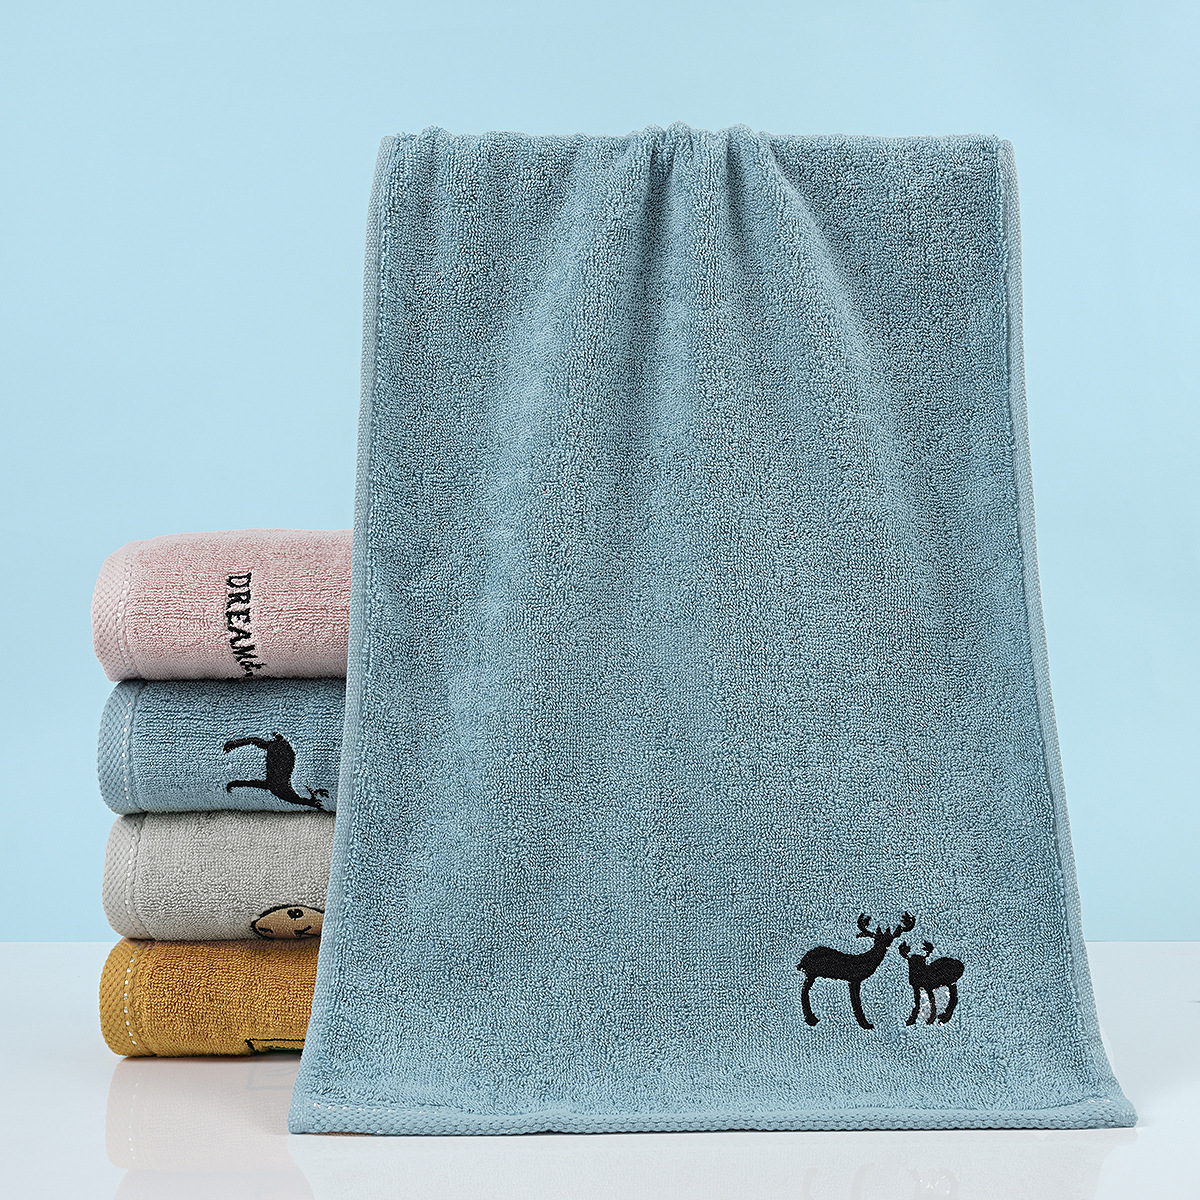 Gaoyang Cotton Towel Simple and Soft Absorbent Face Towel Cotton Wholesale Wedding Partner Present Towel Formulation